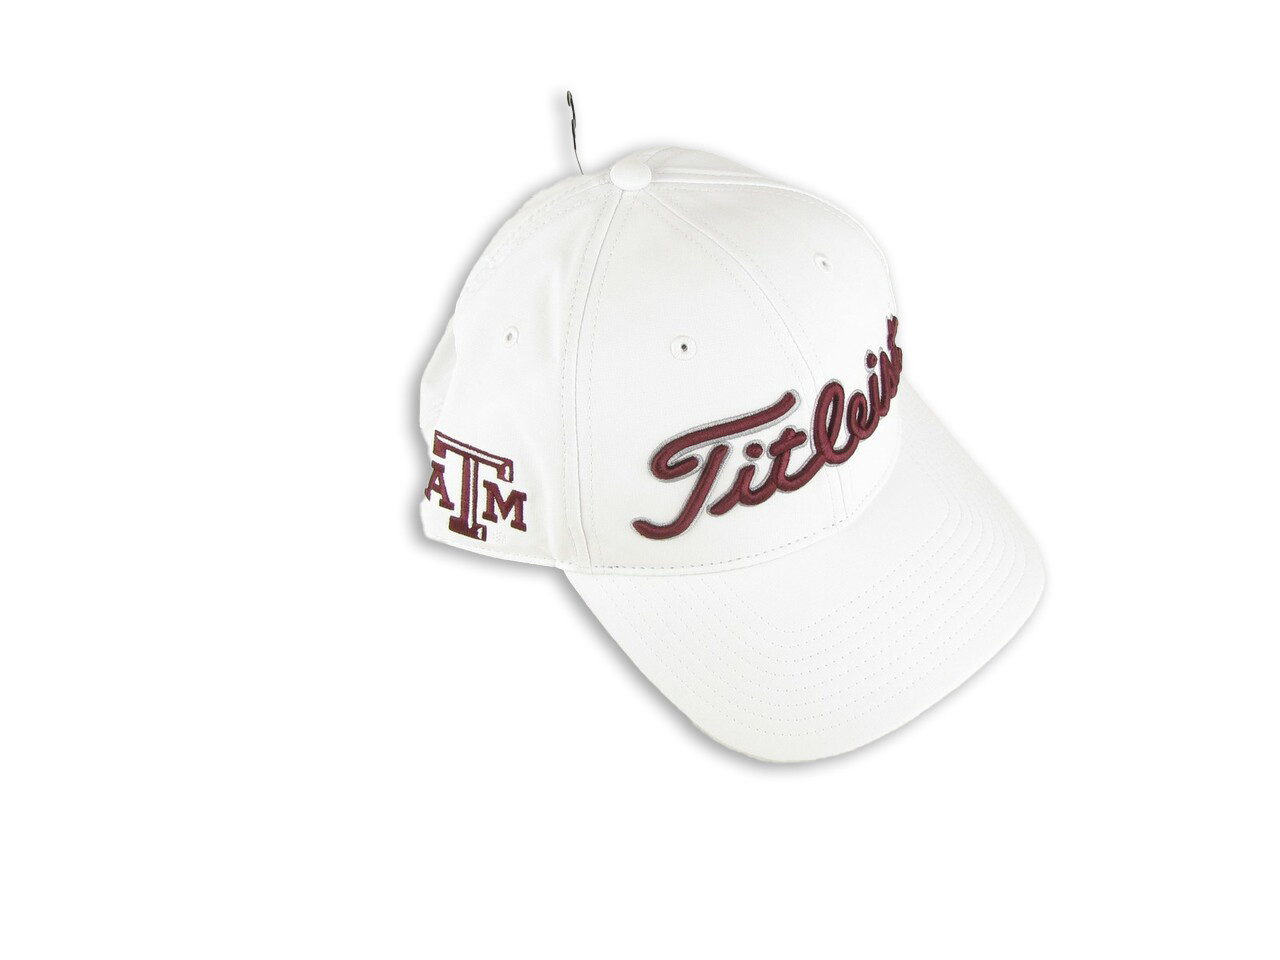 NEW Texas A&M Aggies University College Titleist Golf Performance Hat Cap -  Clubs n Covers Golf